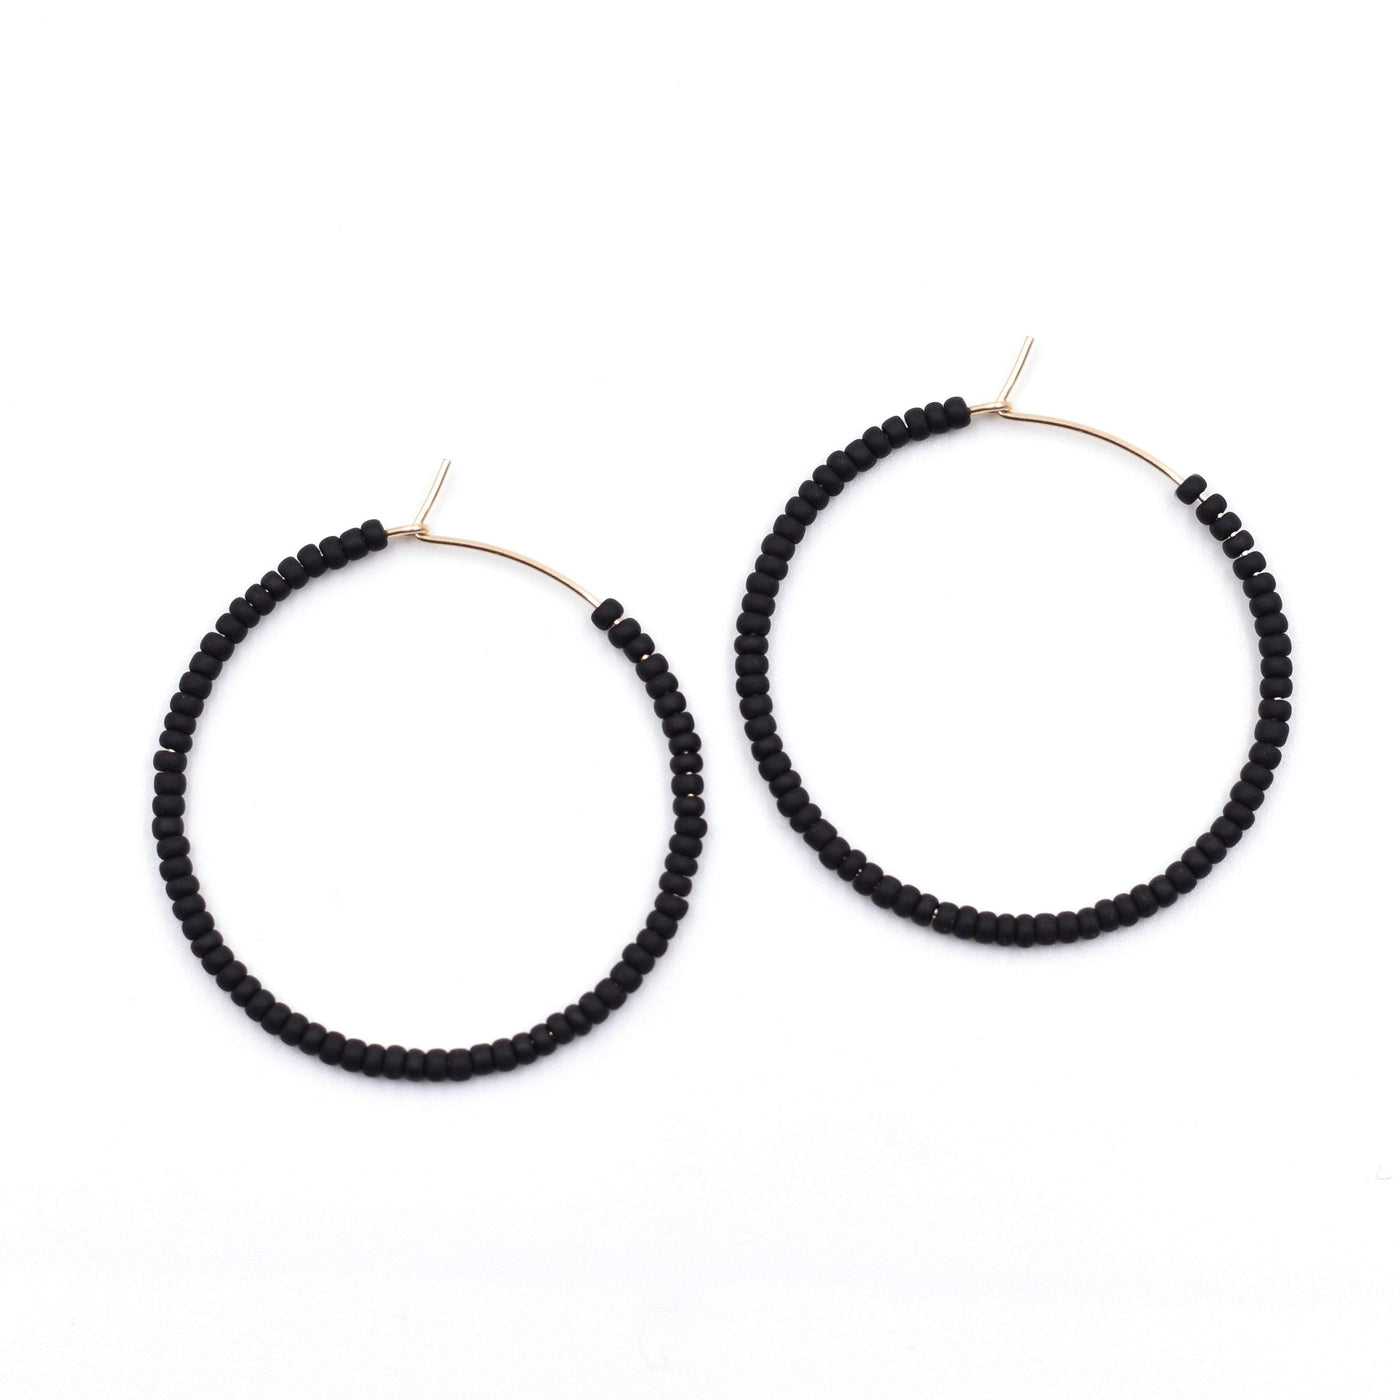 Topaz & Pearl Solid Hoops 1 inch / 14kt Gold Fill Black Solid Seed Bead Hoops